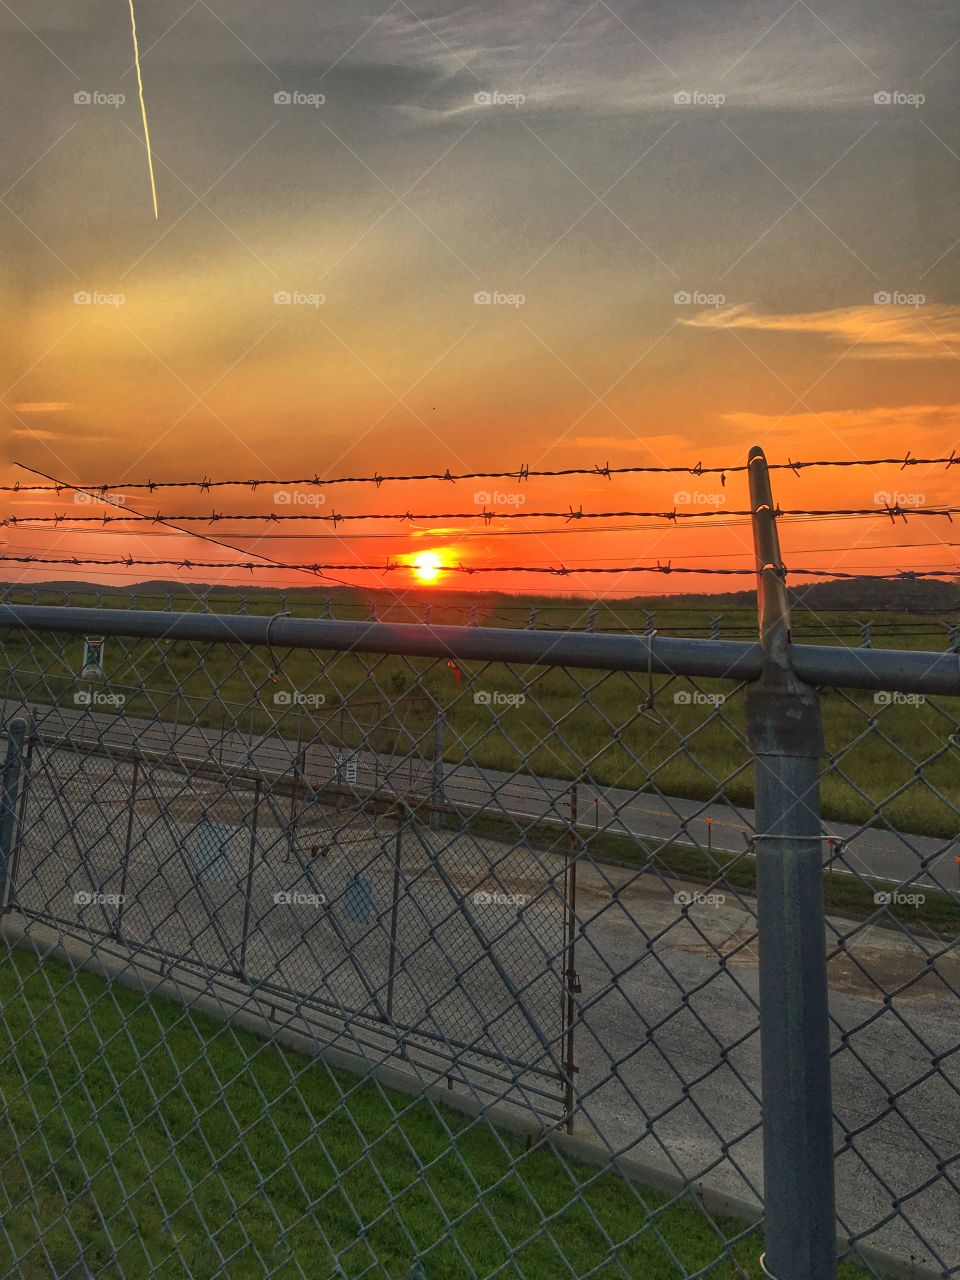 Sunset through barb wire 